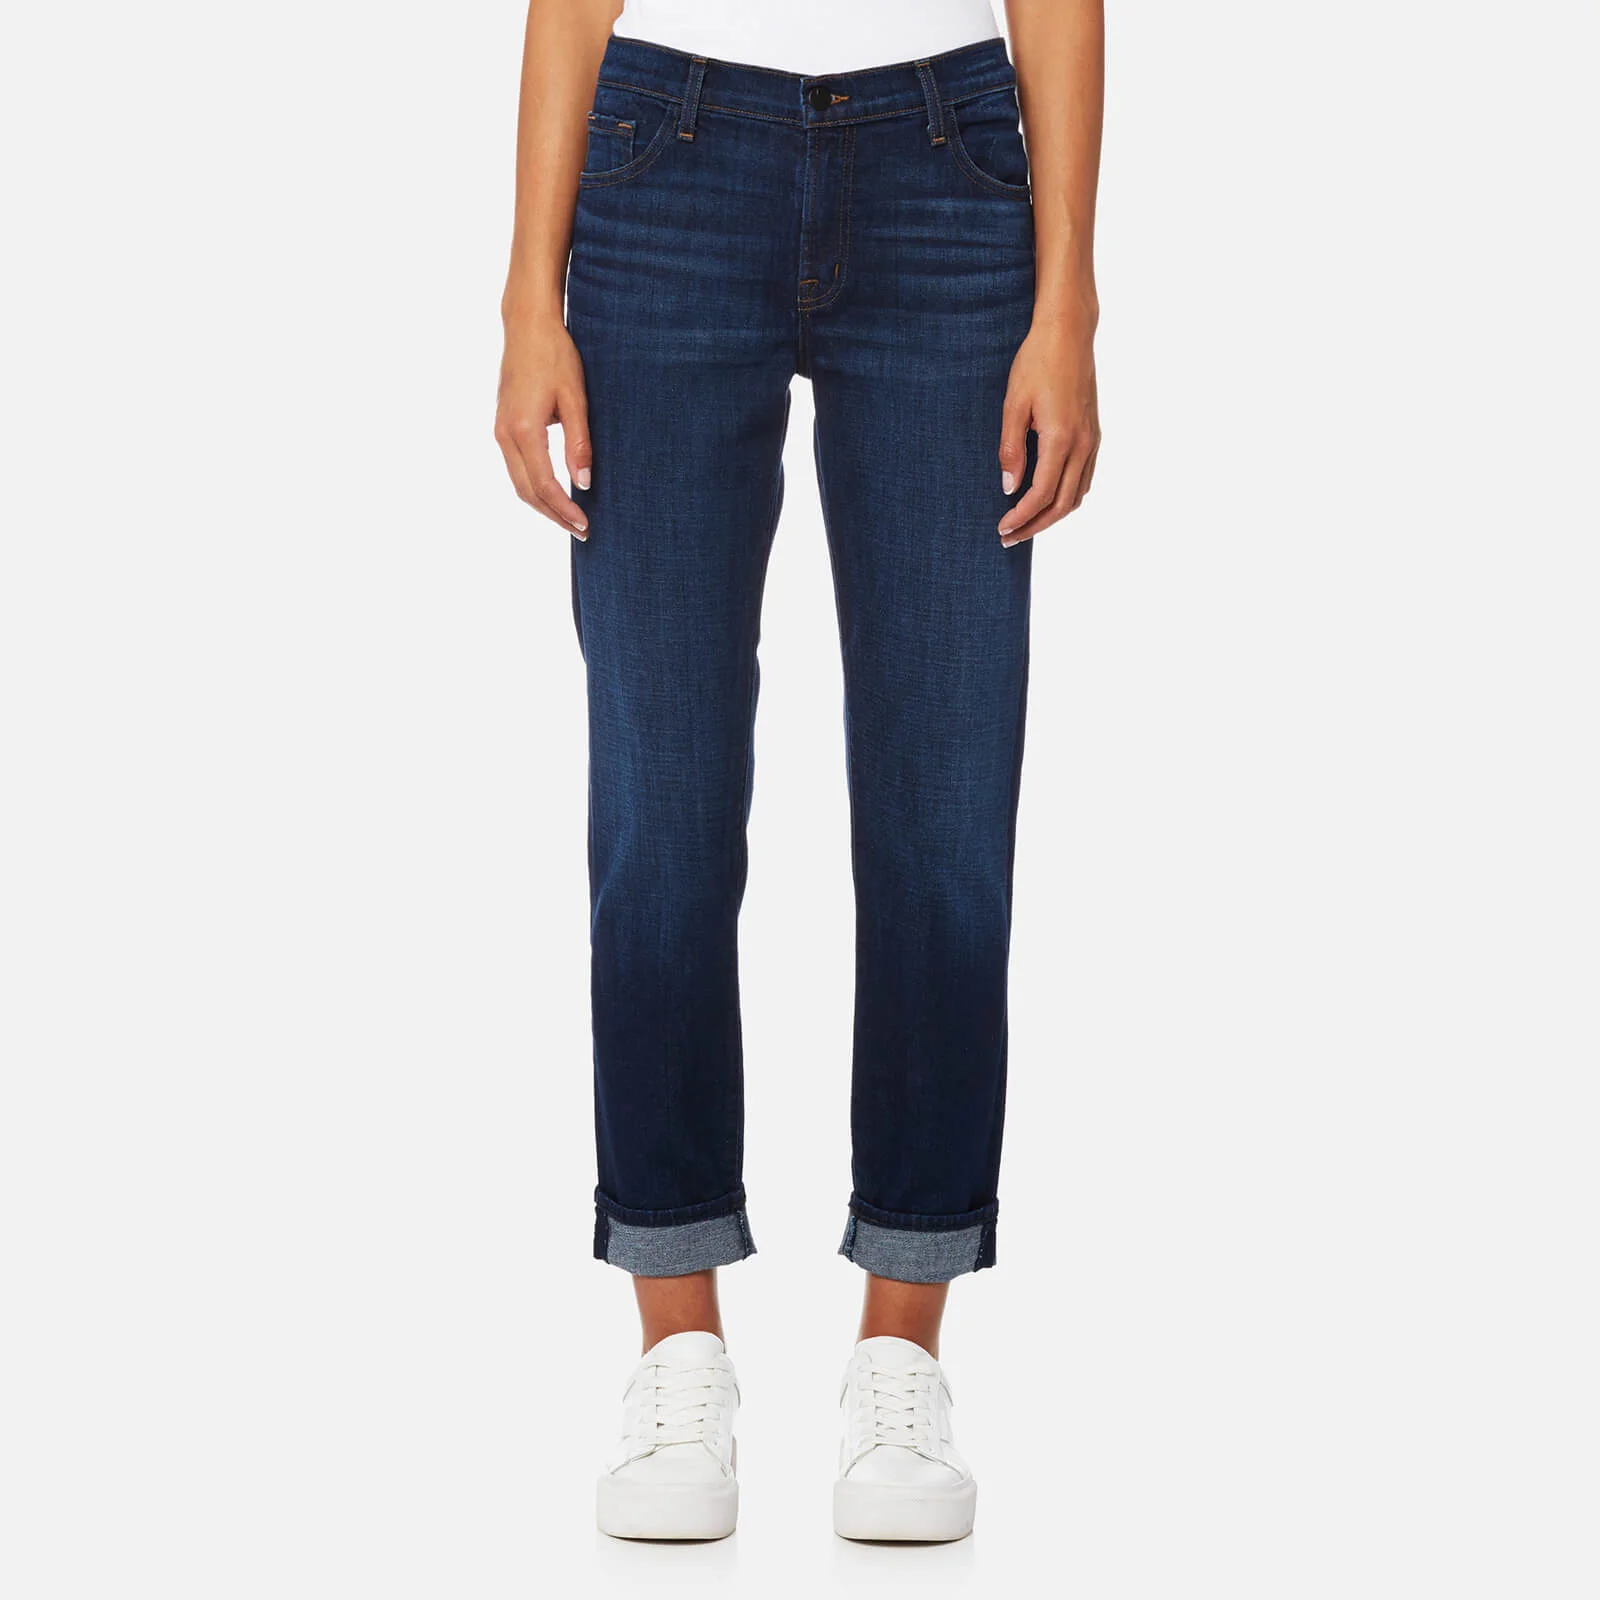 J Brand Women's Johnny Mid Rise Boy Fit Jeans - Cult Image 1